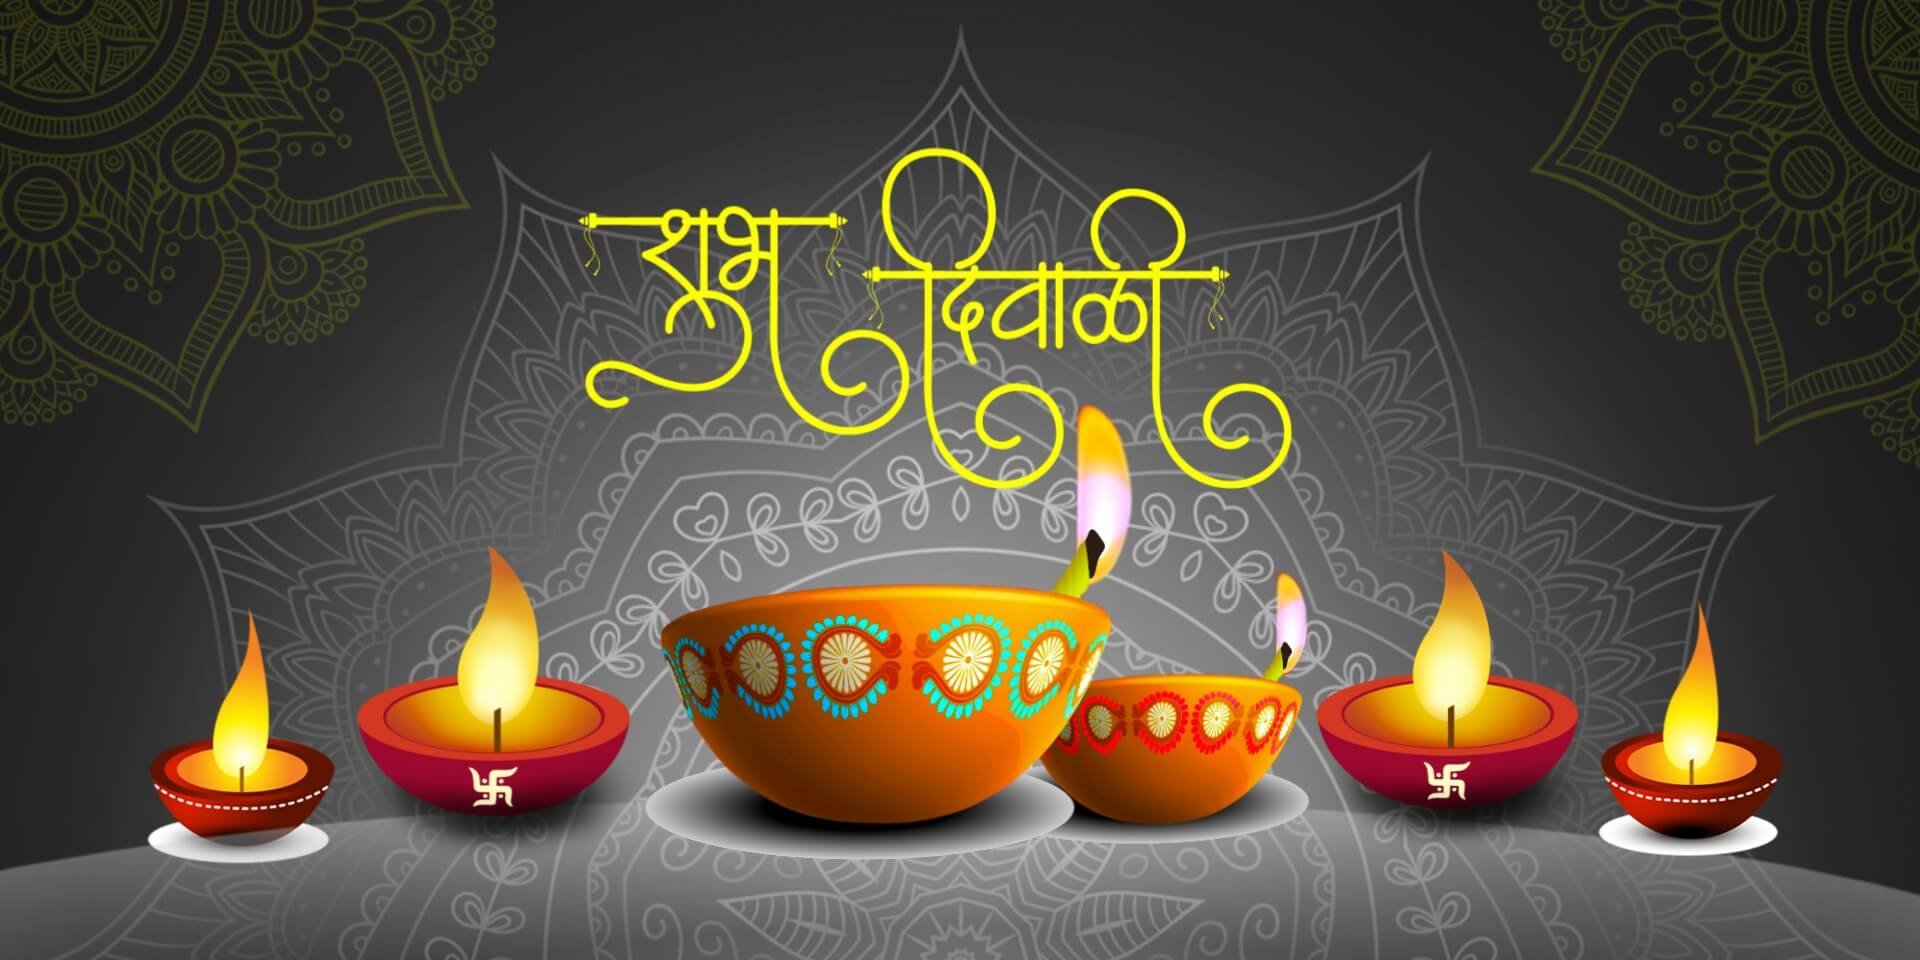 Best Happy Diwali Image, Photo and Picture 2021